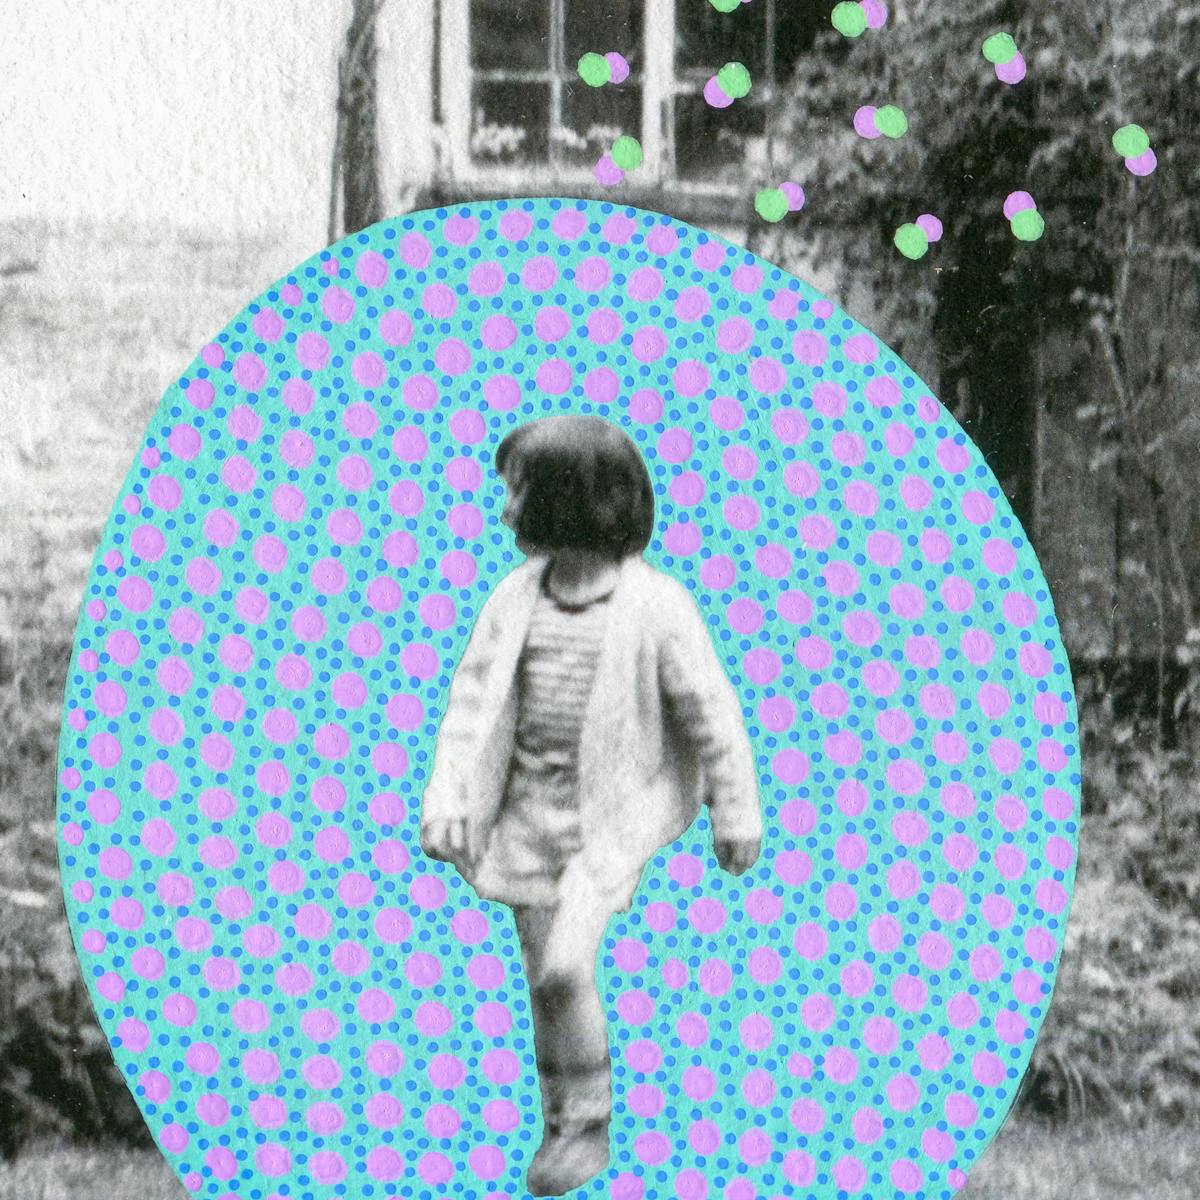 Artwork created by painting over the surface of a black and white photographic print with colourful paint. The artwork shows the original scene of a young girl walking towards the camera with her head turned to the left and her hair obscuring the side of her face. The girl is pictured in front of part of a rural cottage. The front door can be seen under a deep porch made of wooden trellis and tree trunks. To the left of the door is a small window in a white washed brick wall. There are shrubs and lawn in front of the cottage. Under the porch is a petrol lawn mower and part of a white plastic laundry basket. The girl is surrounded by an oval shaped painted cyan background covered in small blue and larger purple dots. Over the original print to the right and above the painted oval are pairs of small painted dots. One dot in the pair is green, the other purple. These dots float like butterflies within the scene.